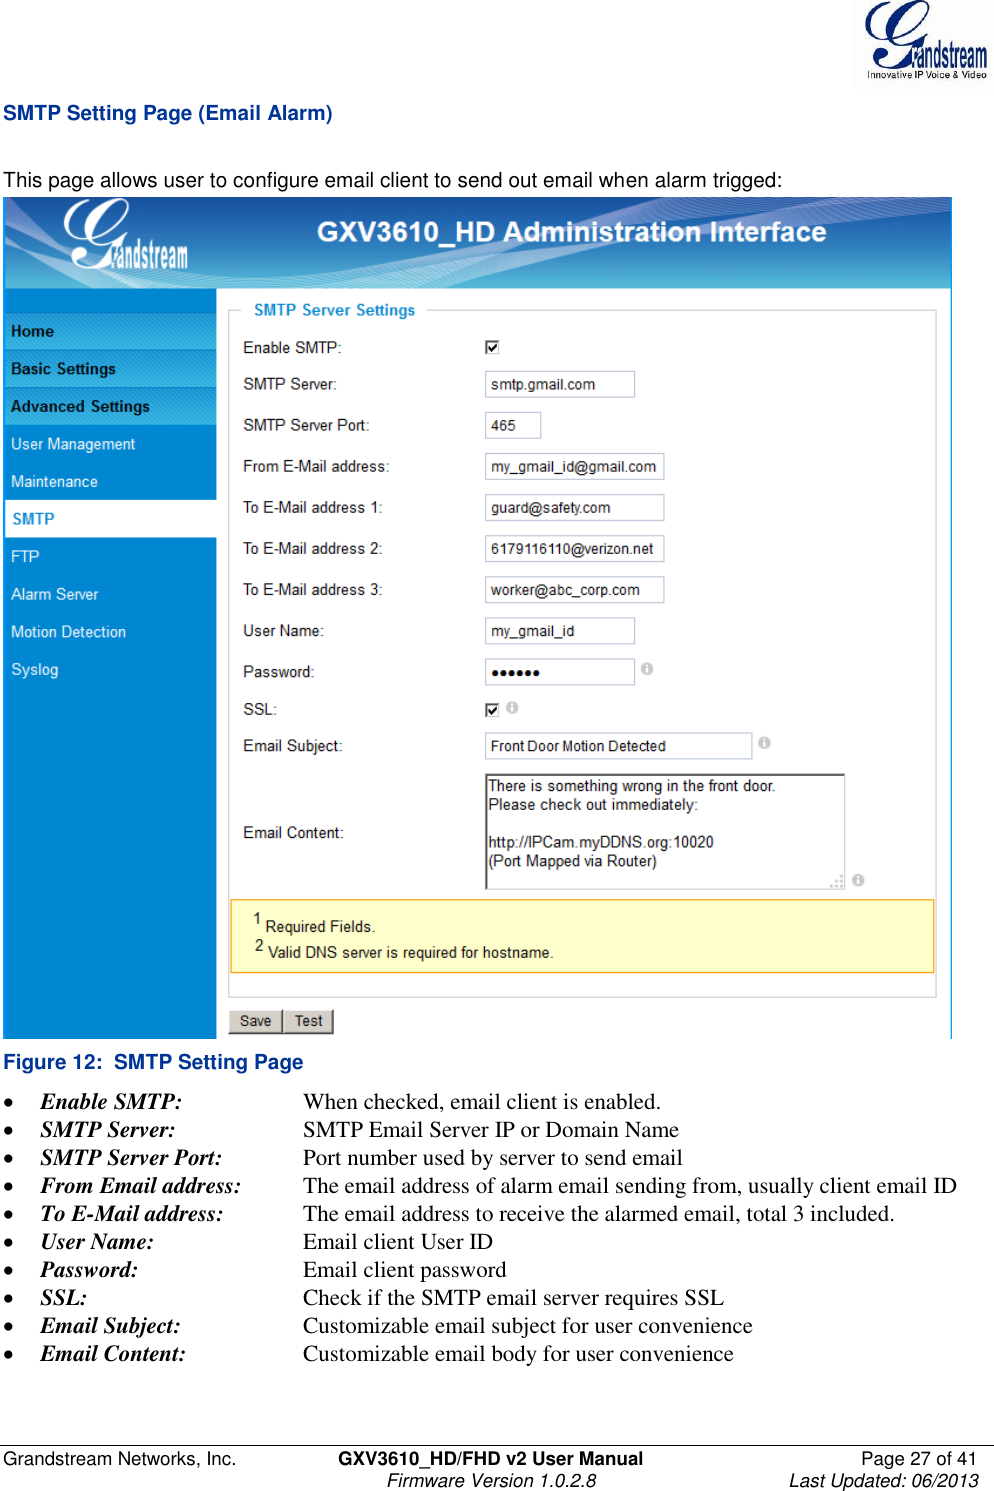  Grandstream Networks, Inc.  GXV3610_HD/FHD v2 User Manual  Page 27 of 41    Firmware Version 1.0.2.8  Last Updated: 06/2013  SMTP Setting Page (Email Alarm)  This page allows user to configure email client to send out email when alarm trigged:  Figure 12:  SMTP Setting Page  Enable SMTP:      When checked, email client is enabled.  SMTP Server:    SMTP Email Server IP or Domain Name  SMTP Server Port:   Port number used by server to send email  From Email address:   The email address of alarm email sending from, usually client email ID  To E-Mail address:    The email address to receive the alarmed email, total 3 included.   User Name:     Email client User ID  Password:      Email client password  SSL:      Check if the SMTP email server requires SSL  Email Subject:    Customizable email subject for user convenience  Email Content:    Customizable email body for user convenience    